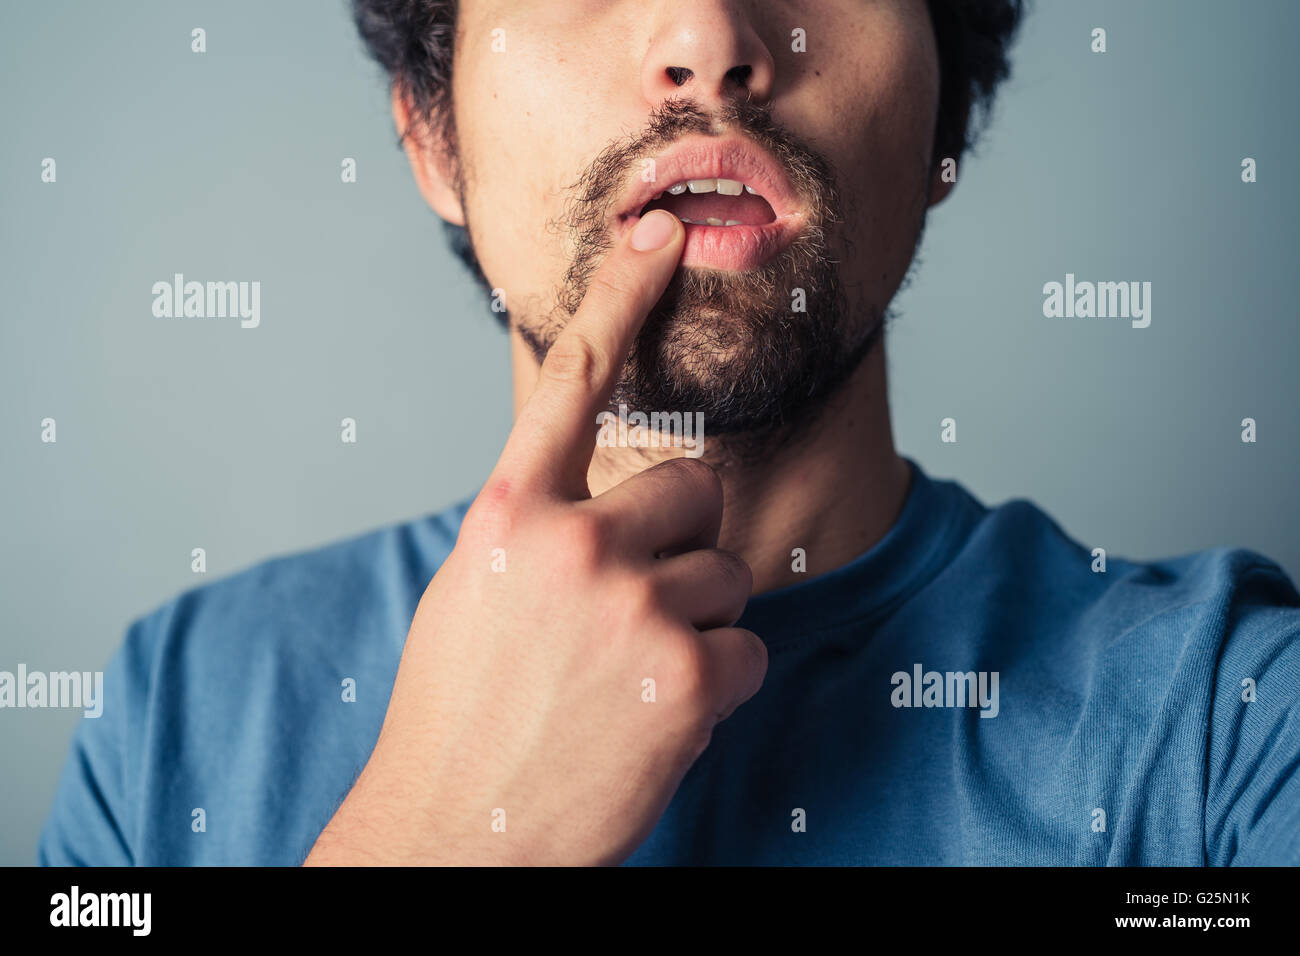 Confused young man touching his lip with his finger Stock Photo